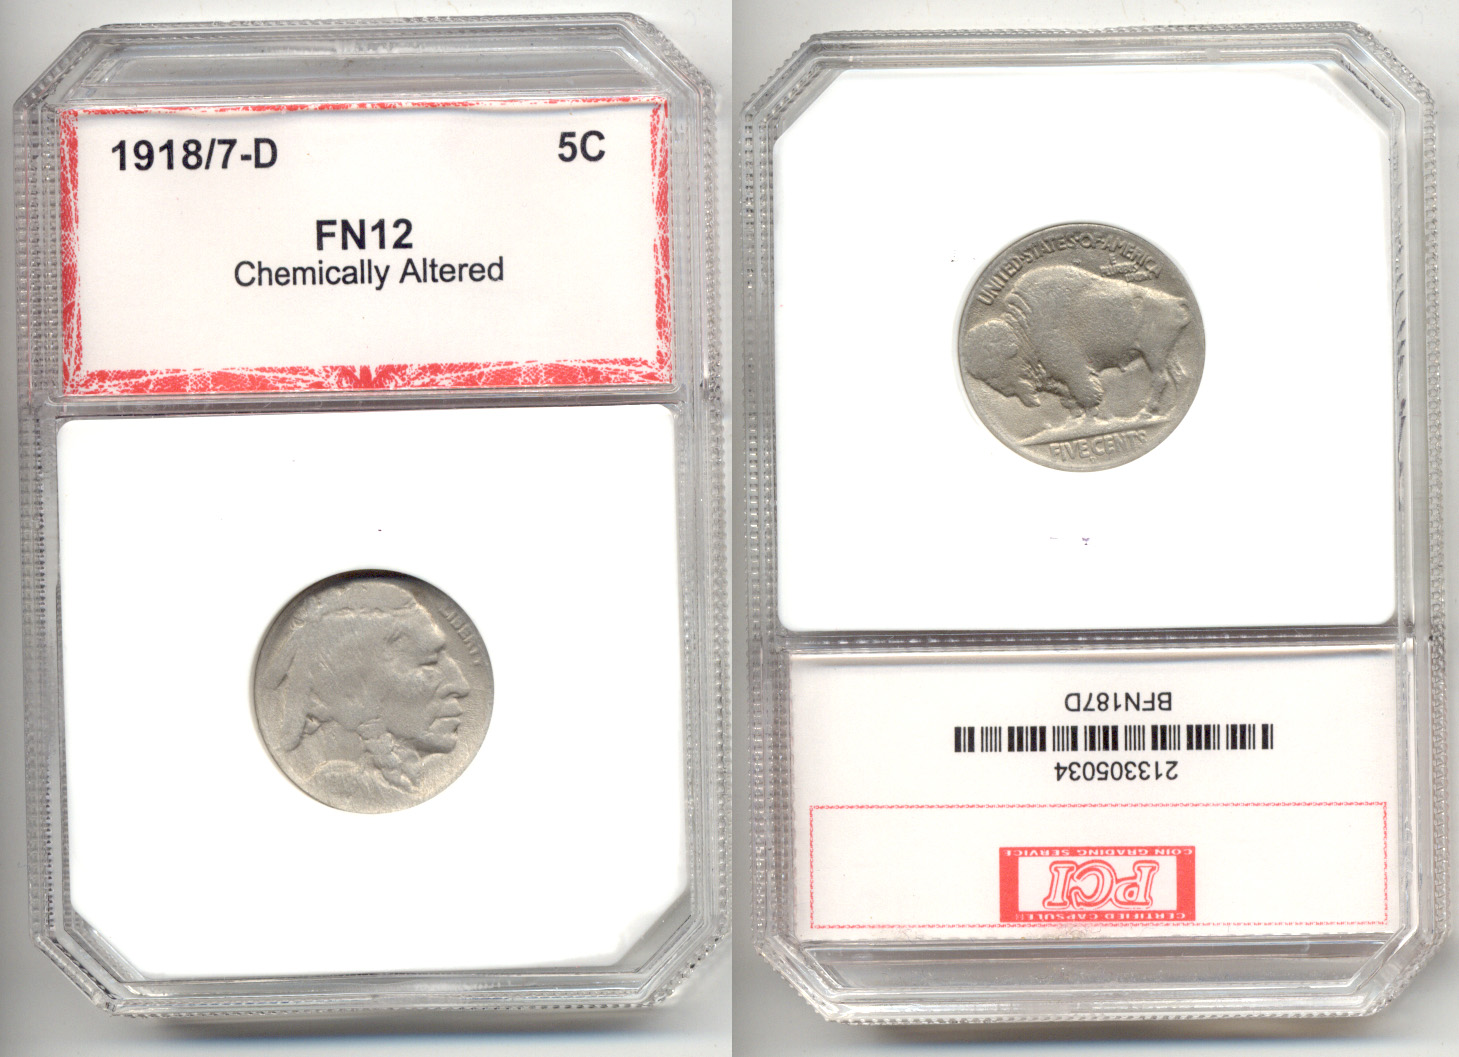 1918/7-D 8 over 7 Buffalo Nickel PCI F-12 Chemically Altered